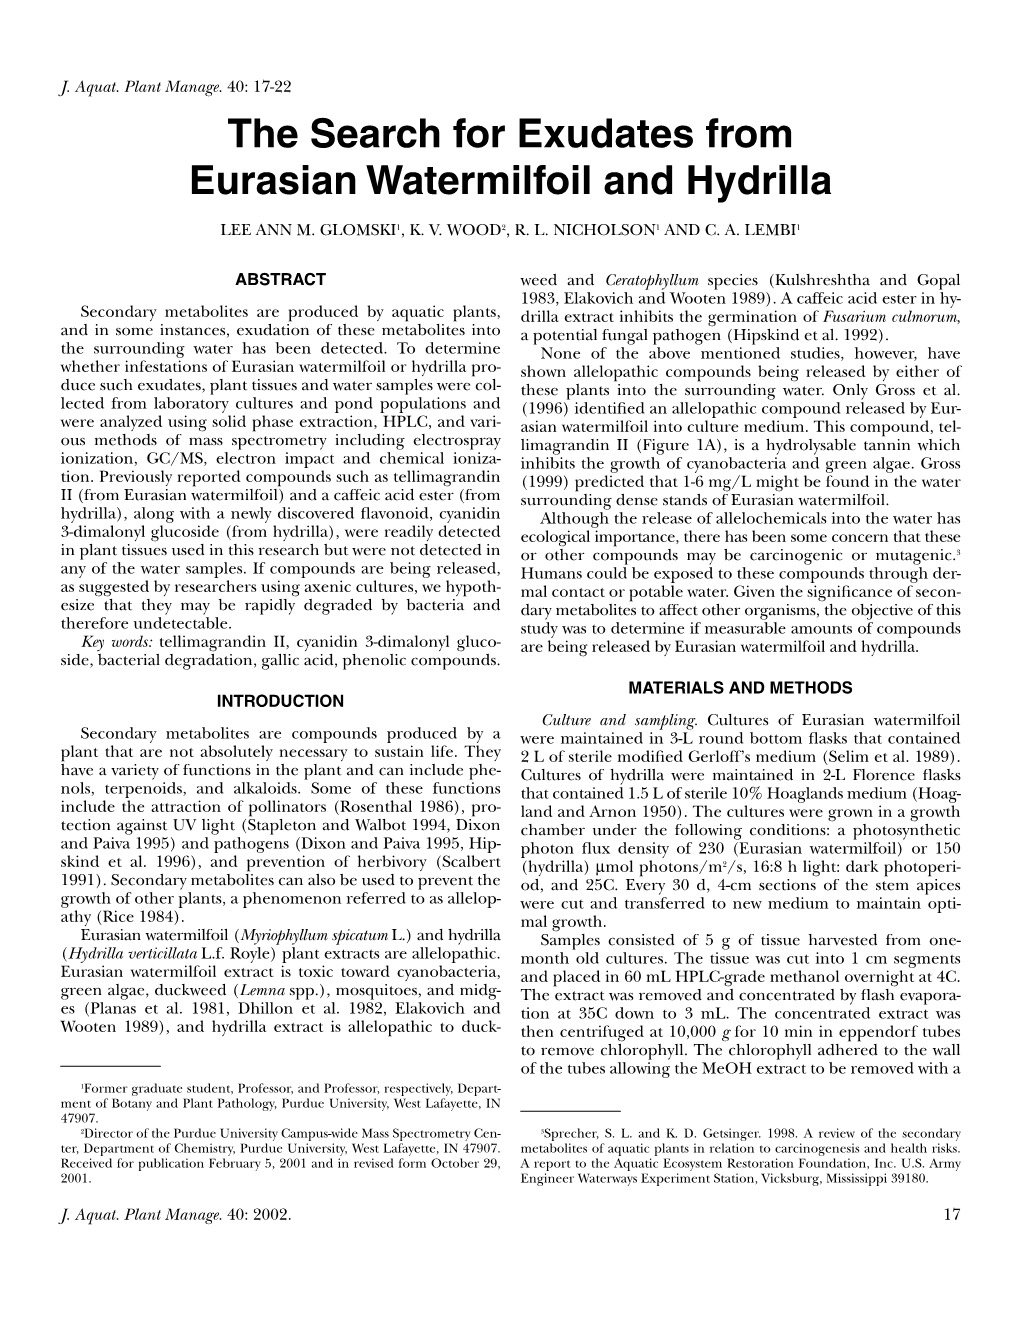 The Search for Exudates from Eurasian Watermilfoil and Hydrilla